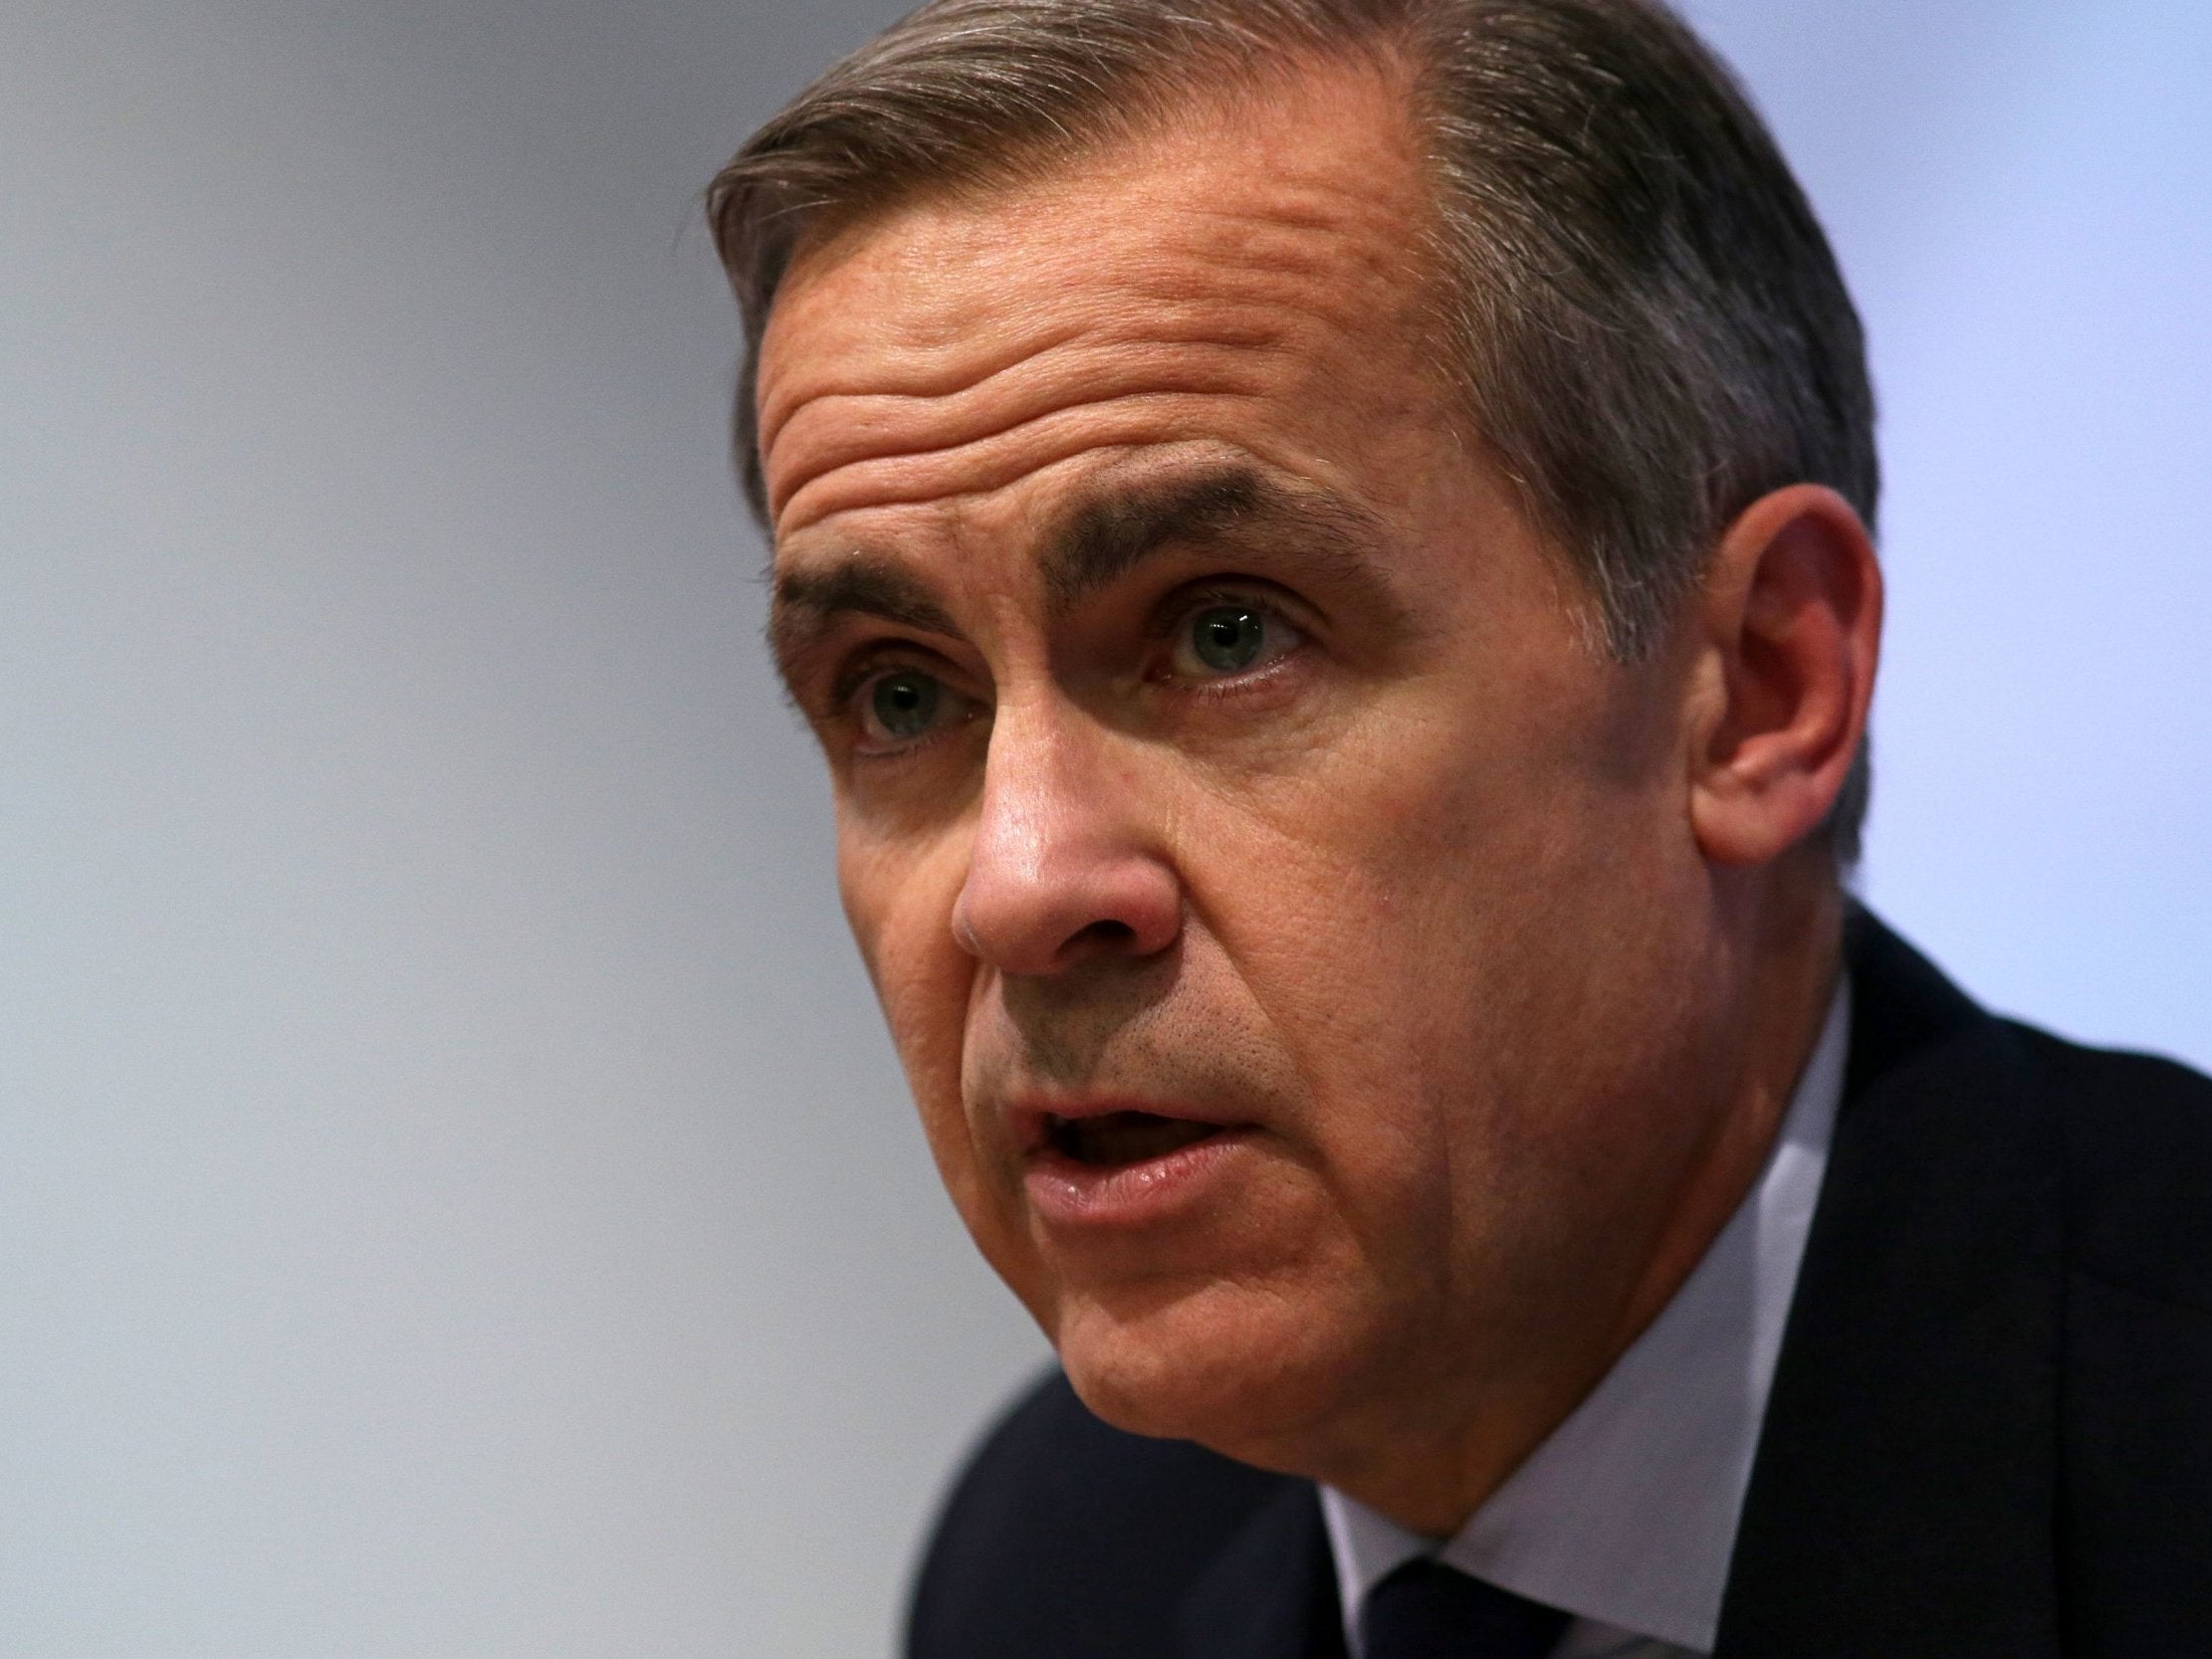 The Bank of England governor Mark Carney has signalled faster interest rate rises